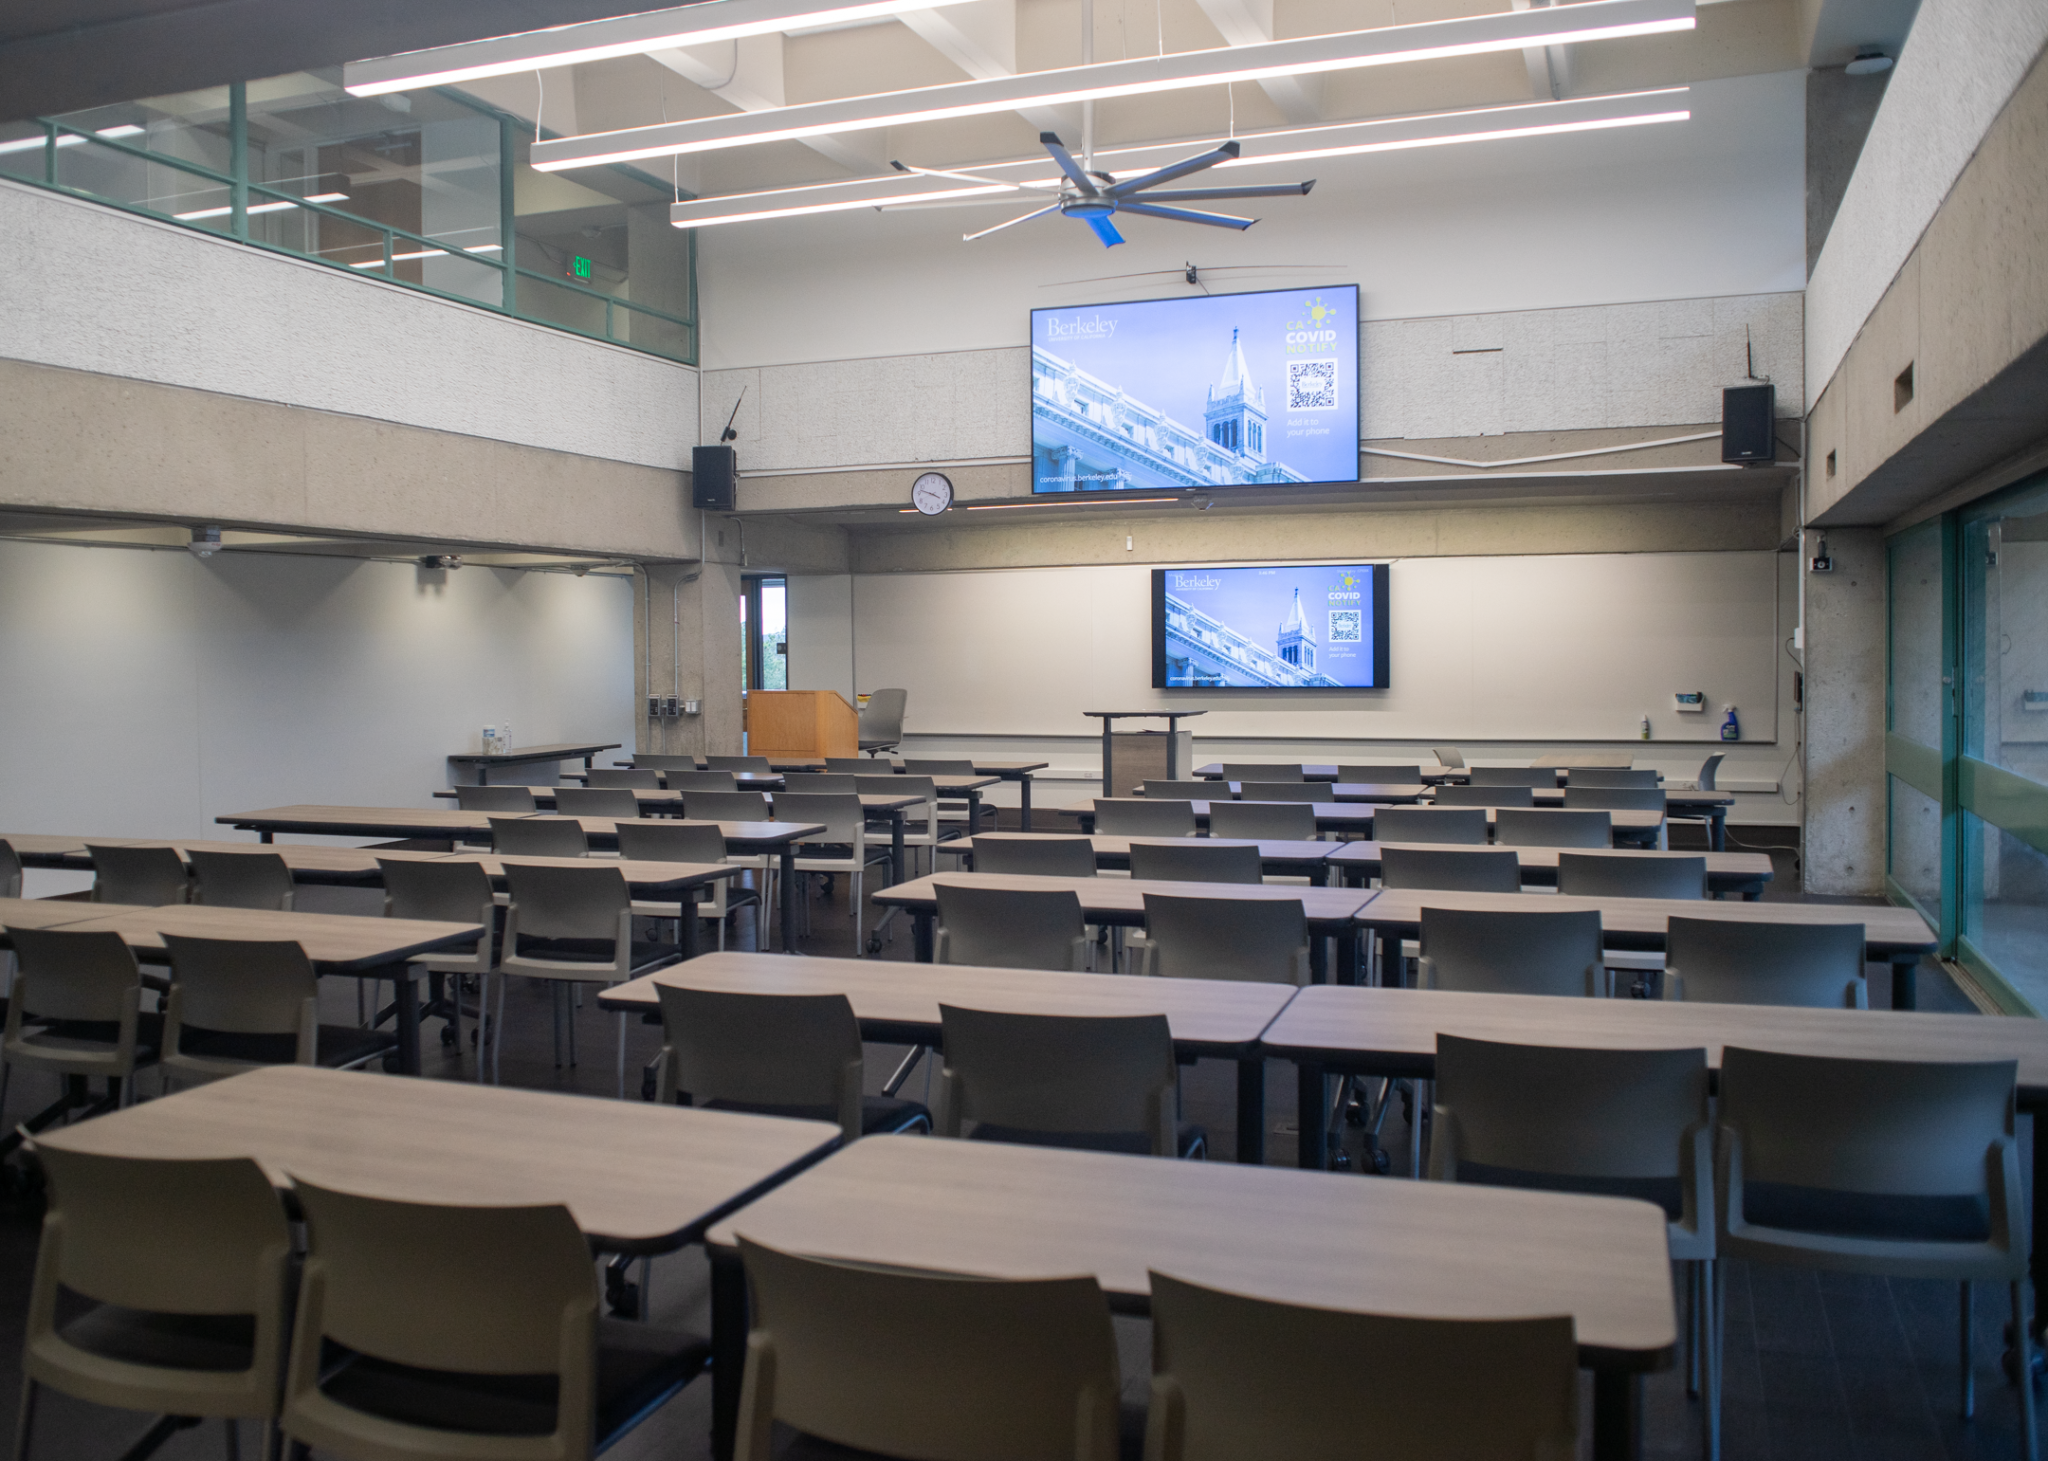 One of the classrooms at Mudd Hall with rows of desks in front of a podium and two large screens.